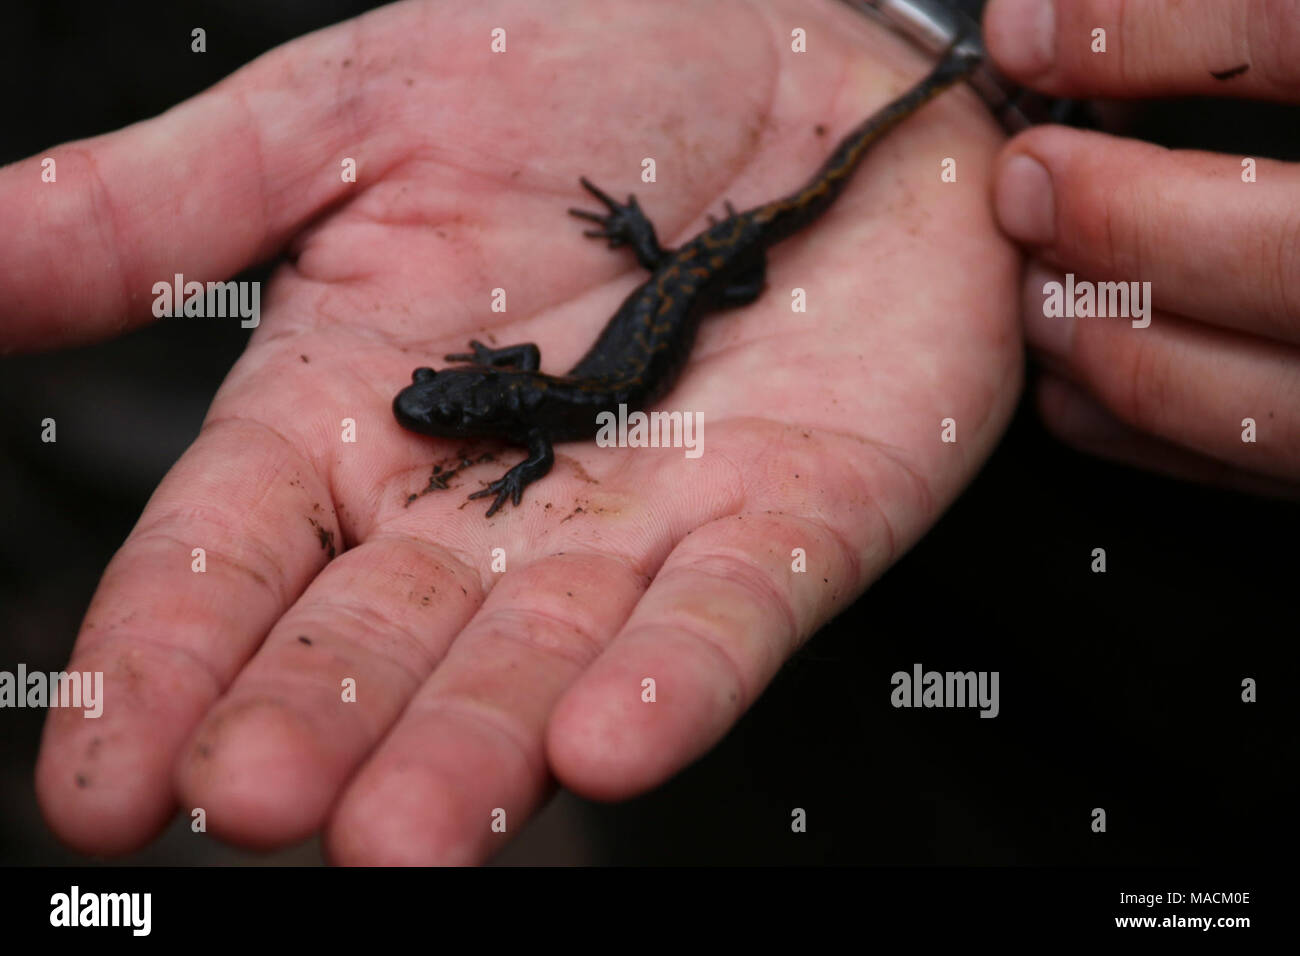 images photography stock and Long - toed salamander Alamy hi-res